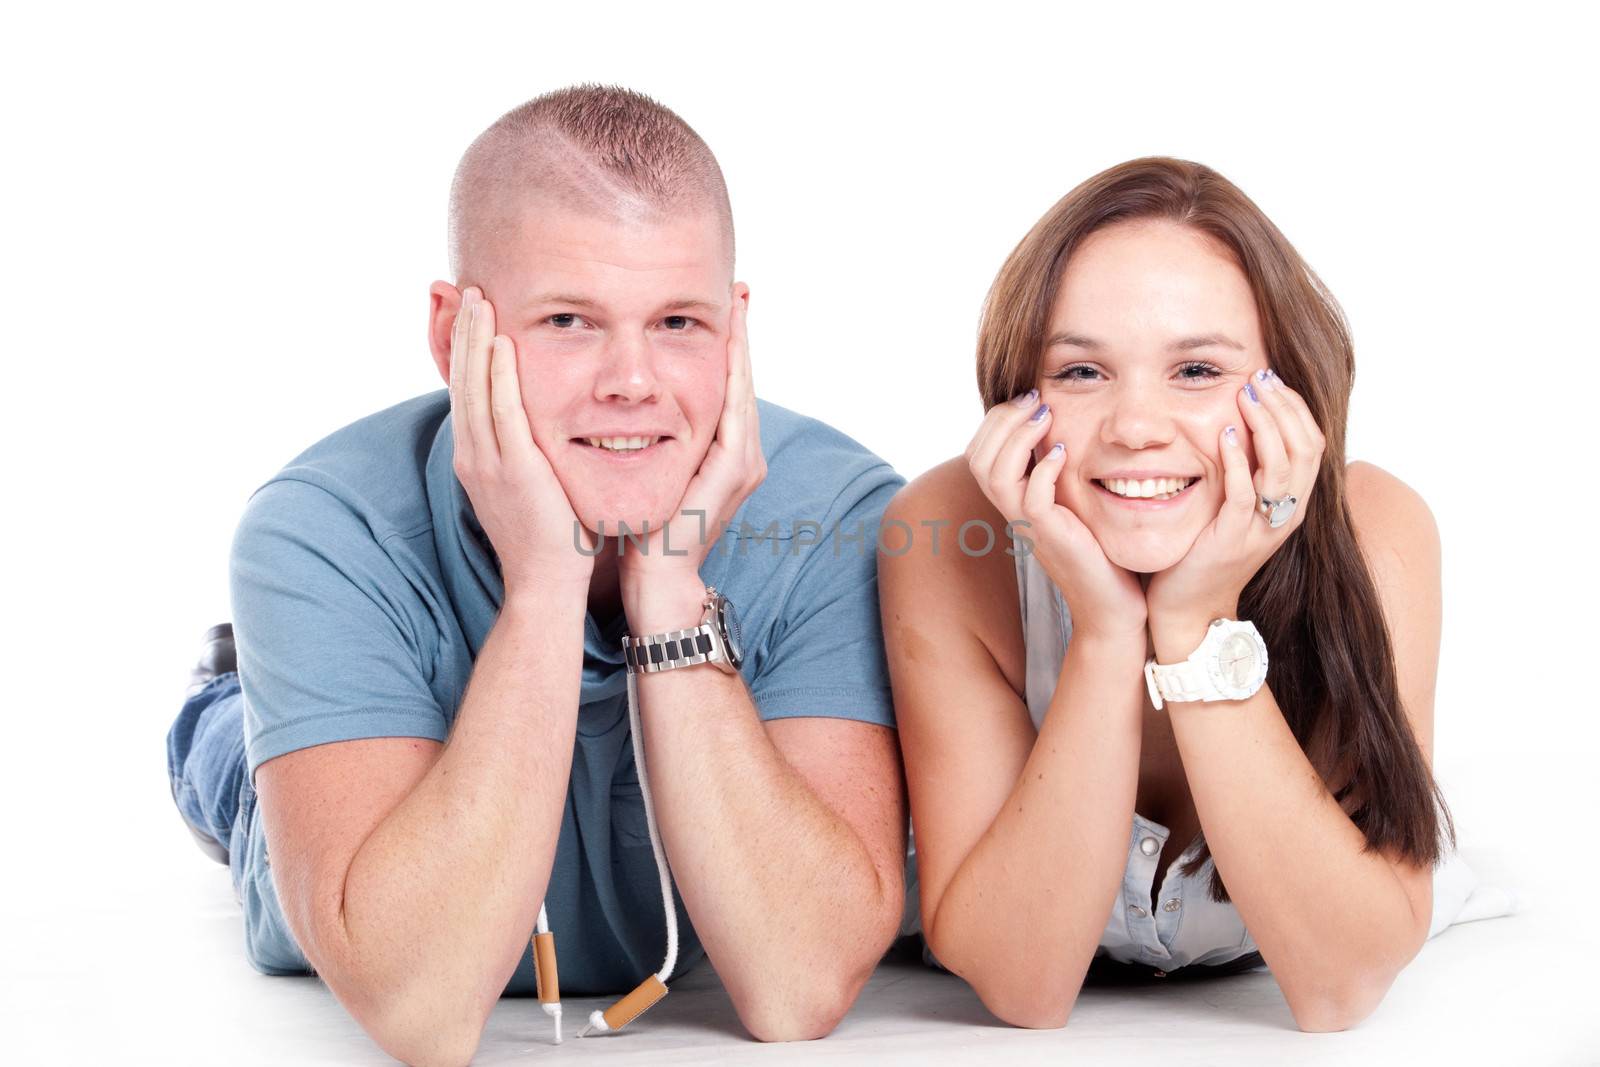 Smiling young couple by DNFStyle